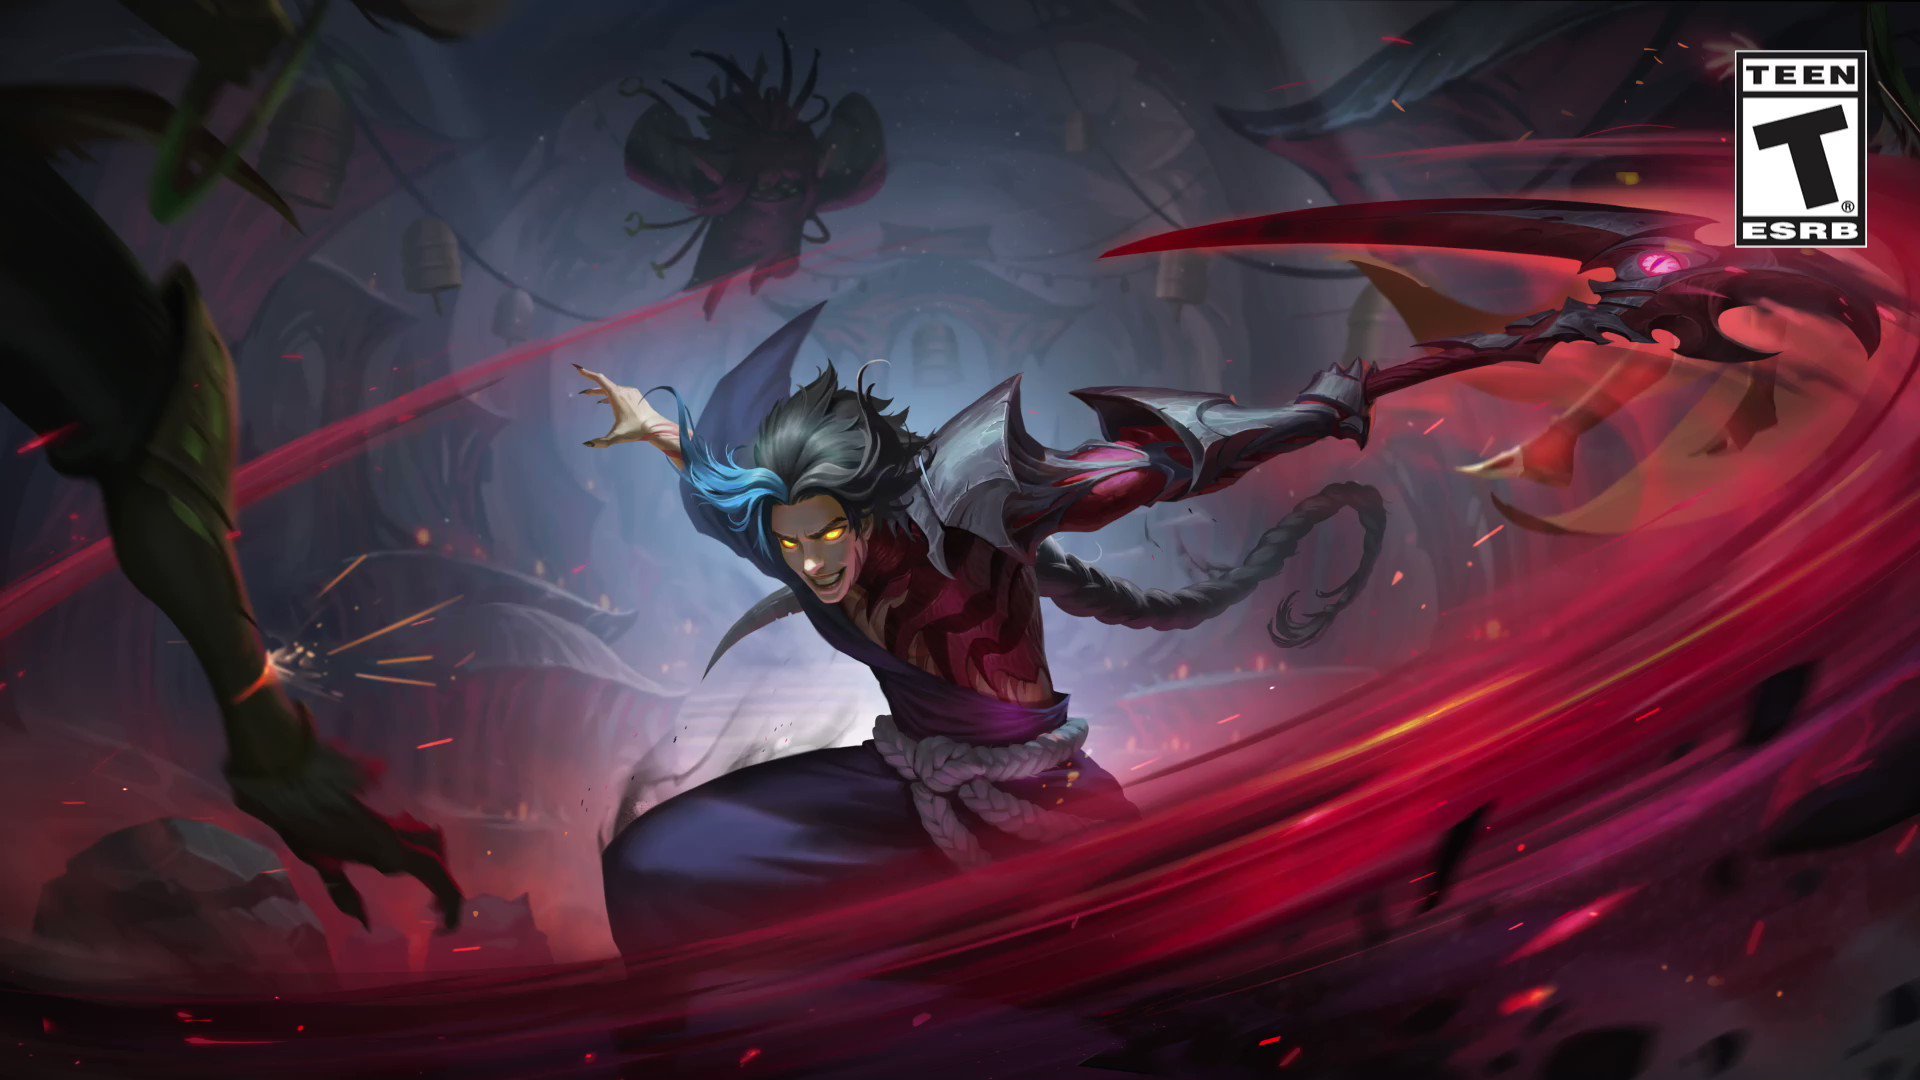 Legends of Runeterra weak must obey the strong. Kayn gains a deadly new form—and companion—in Awakening, releasing on August 31